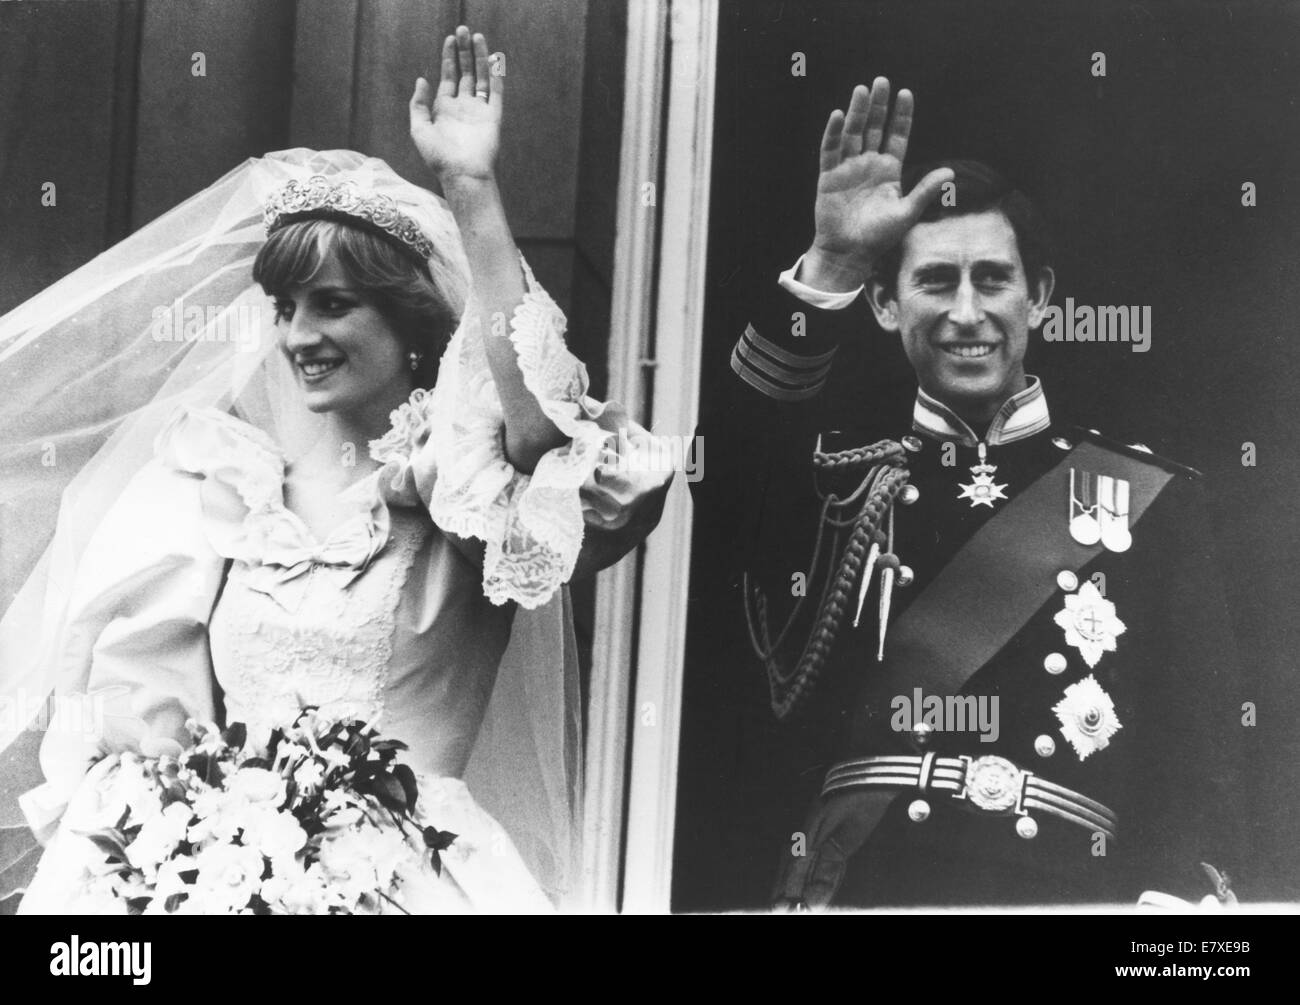 London, UK, UK. 29th July, 1981. PRINCE CHARLES and DIANA SPENCER (1961-1997) after nuptials. Wedding of Charles, Prince of Wales, and LADY DIANA SPENCER held at St. Paul's Cathedral, watched by a global television audience of 750 million while 600,000 people lined the streets to catch a glimpse of Diana en route to the ceremony. © KEYSTONE Pictures/ZUMA Wire/ZUMAPRESS.com/Alamy Live News Stock Photo